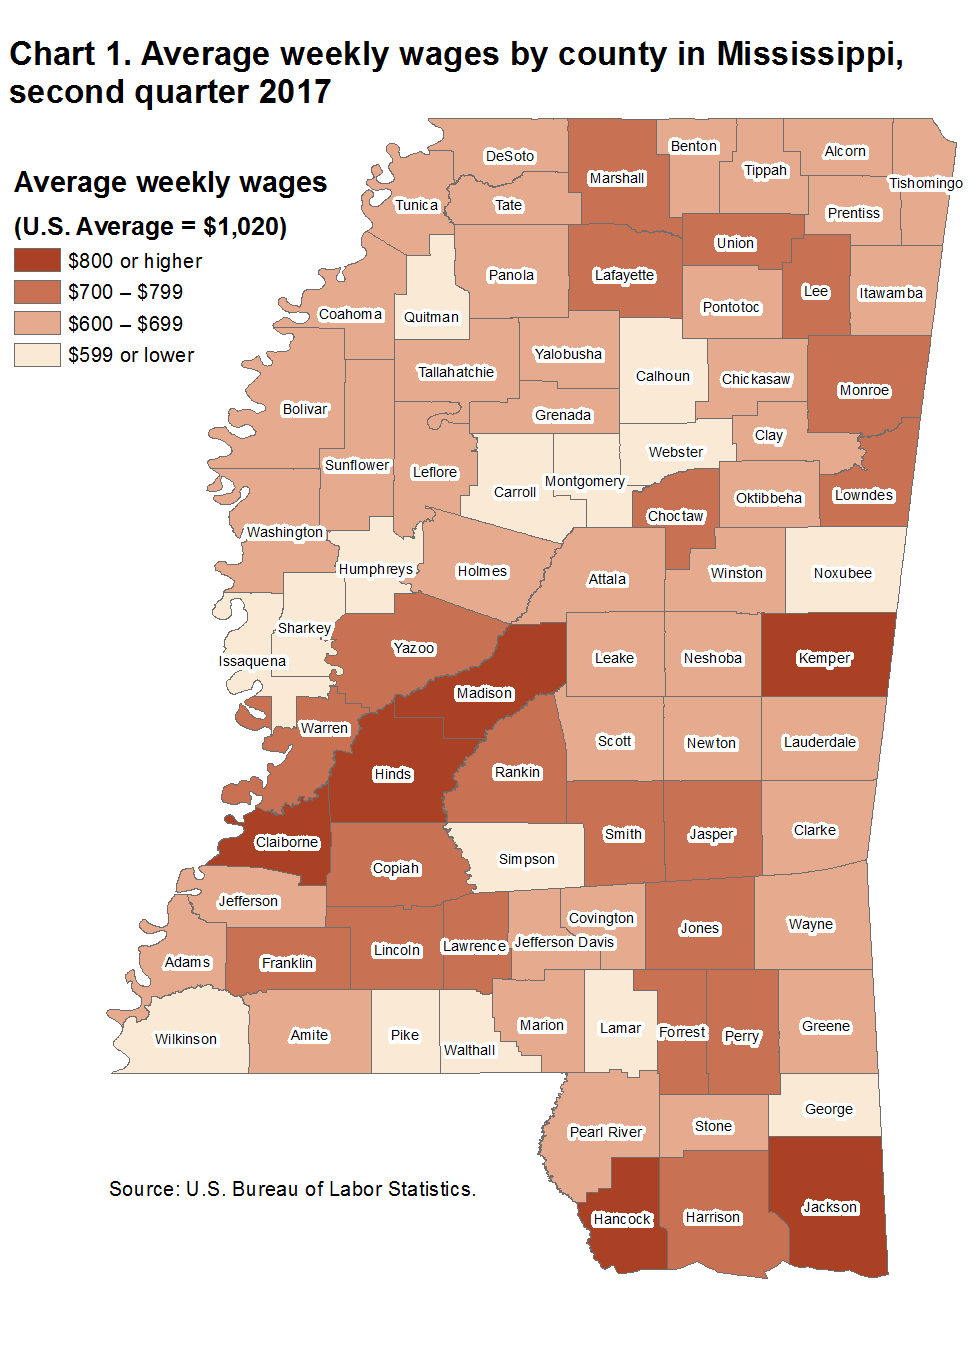 Chart 1. Average weekly wages by county in Mississippi, second quarter 2017